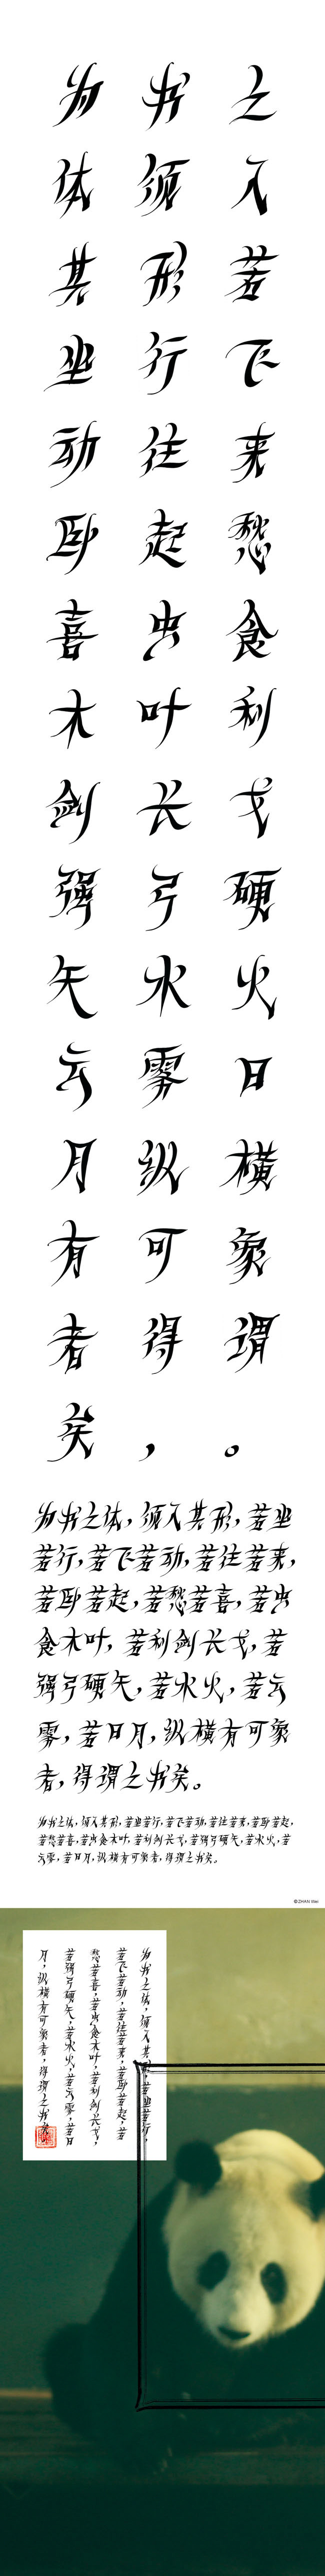 Founder chinese  font  design